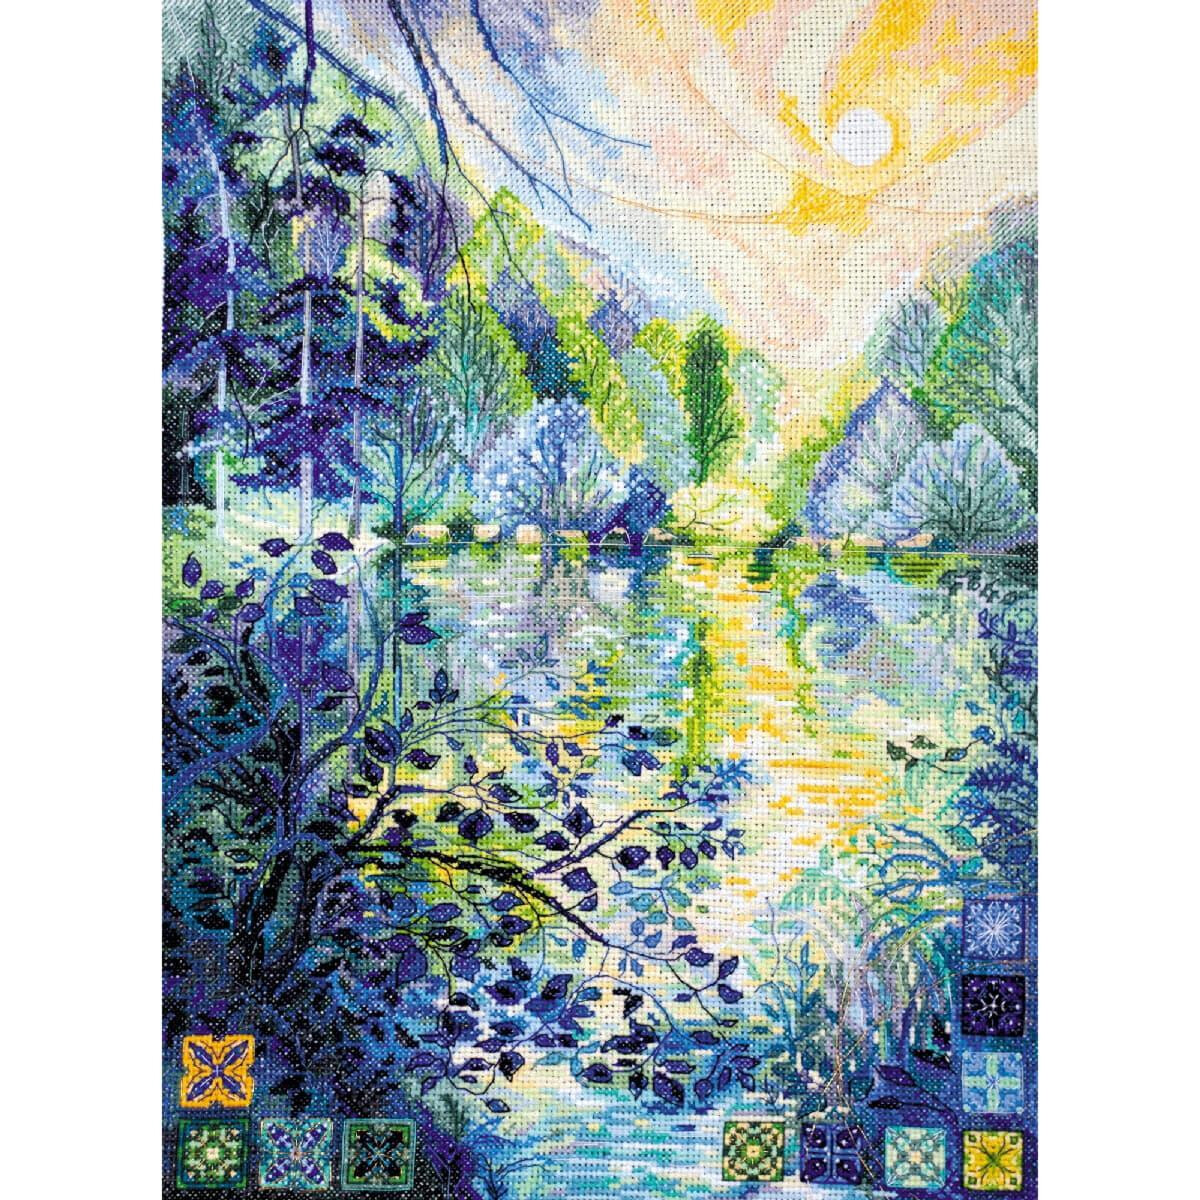 Abris Art counted cross stitch kit "Dawn over the...